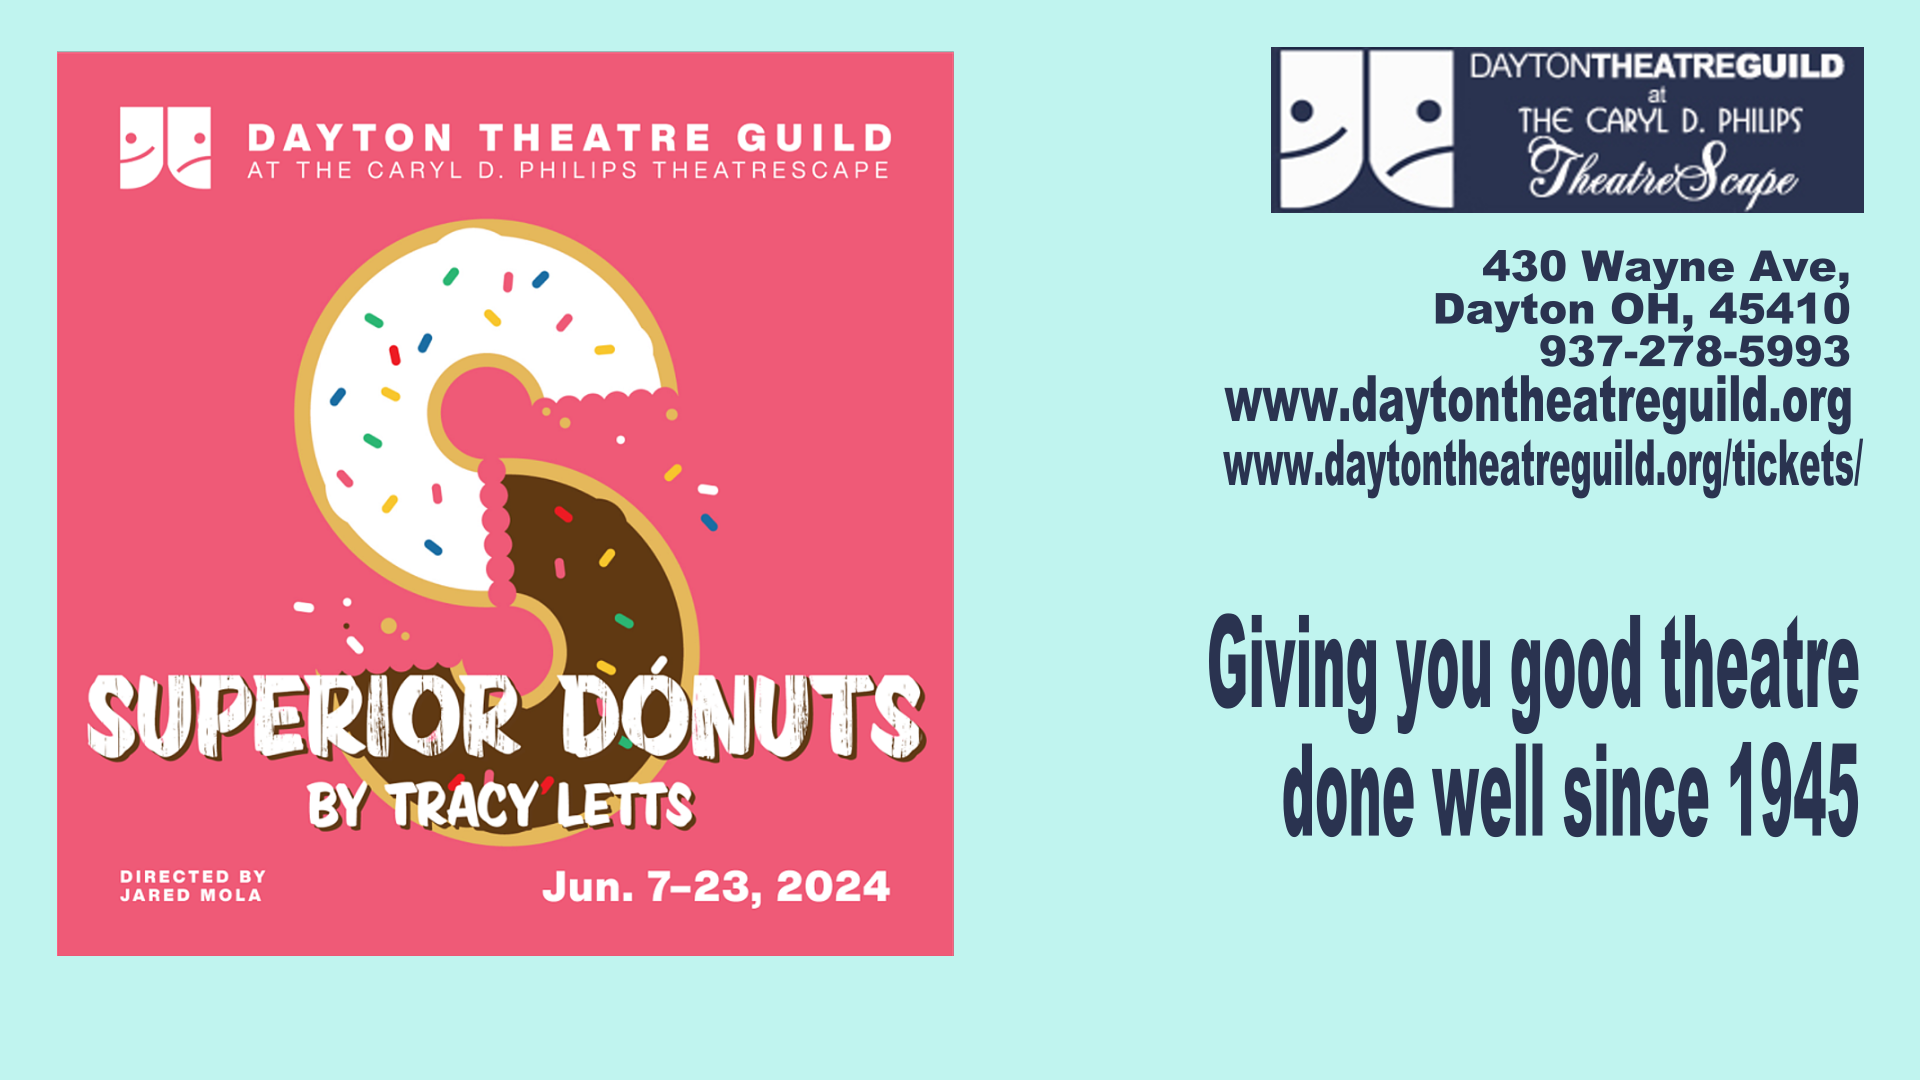 SUPERIOR DONUTS, by Tracey Letts at The Dayton Theatre Guild